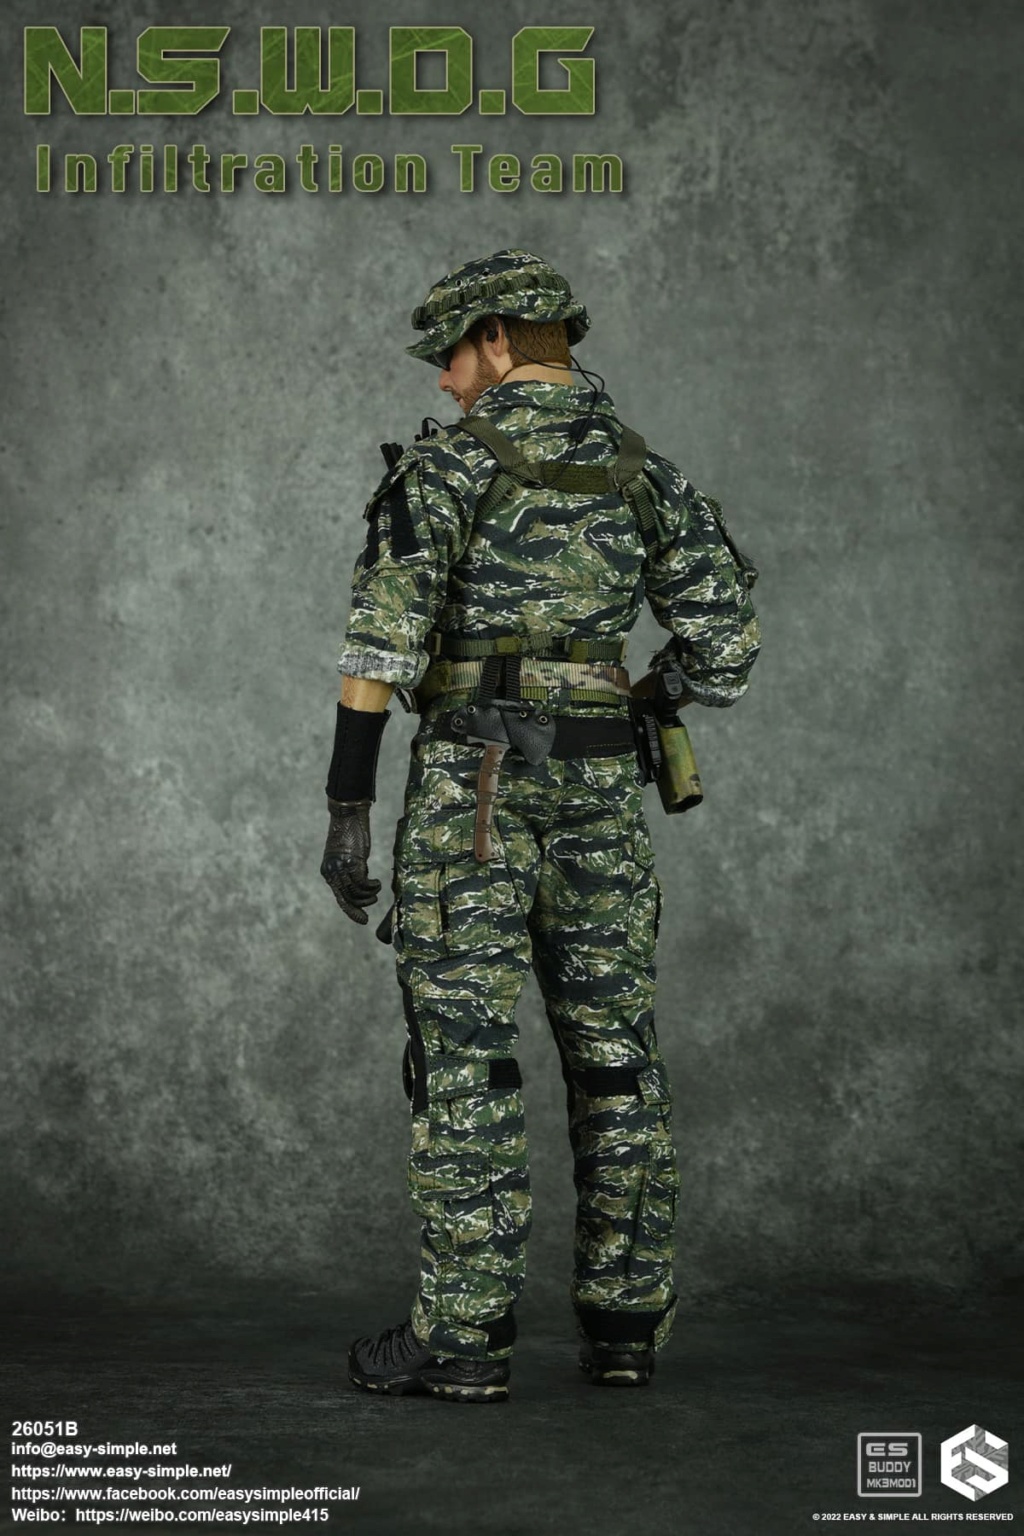 ModernMilitary - NEW PRODUCT: EASY AND SIMPLE 1/6 SCALE FIGURE: N.S.W.D.G INFILTRATION TEAM - (2 Versions) 7603